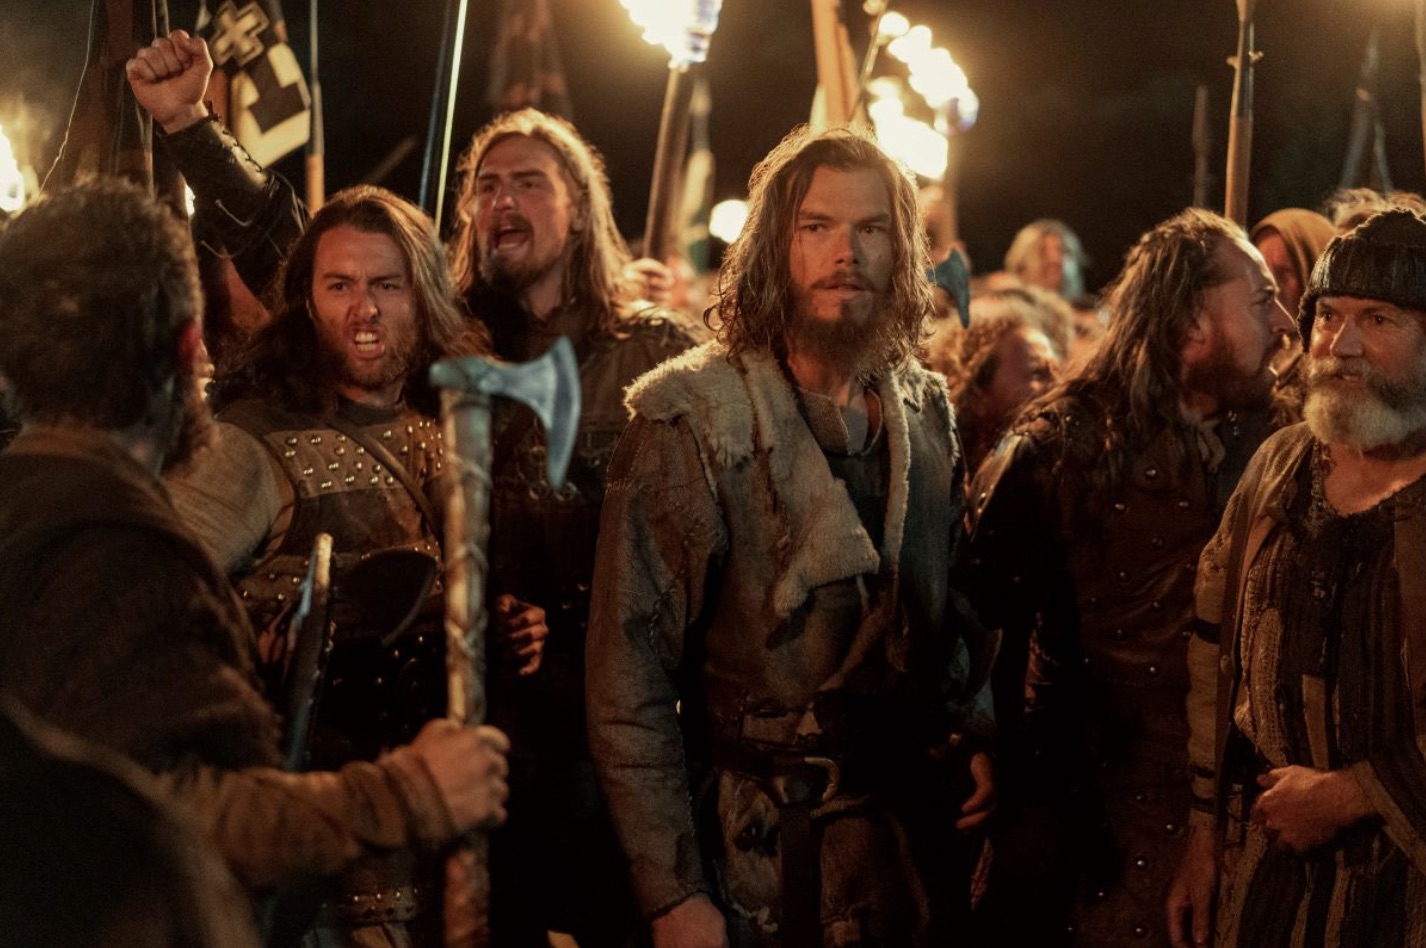 Sam Corlett wears full Viking clothes and stands with fellow Vikings in "Vikings: Valhalla".